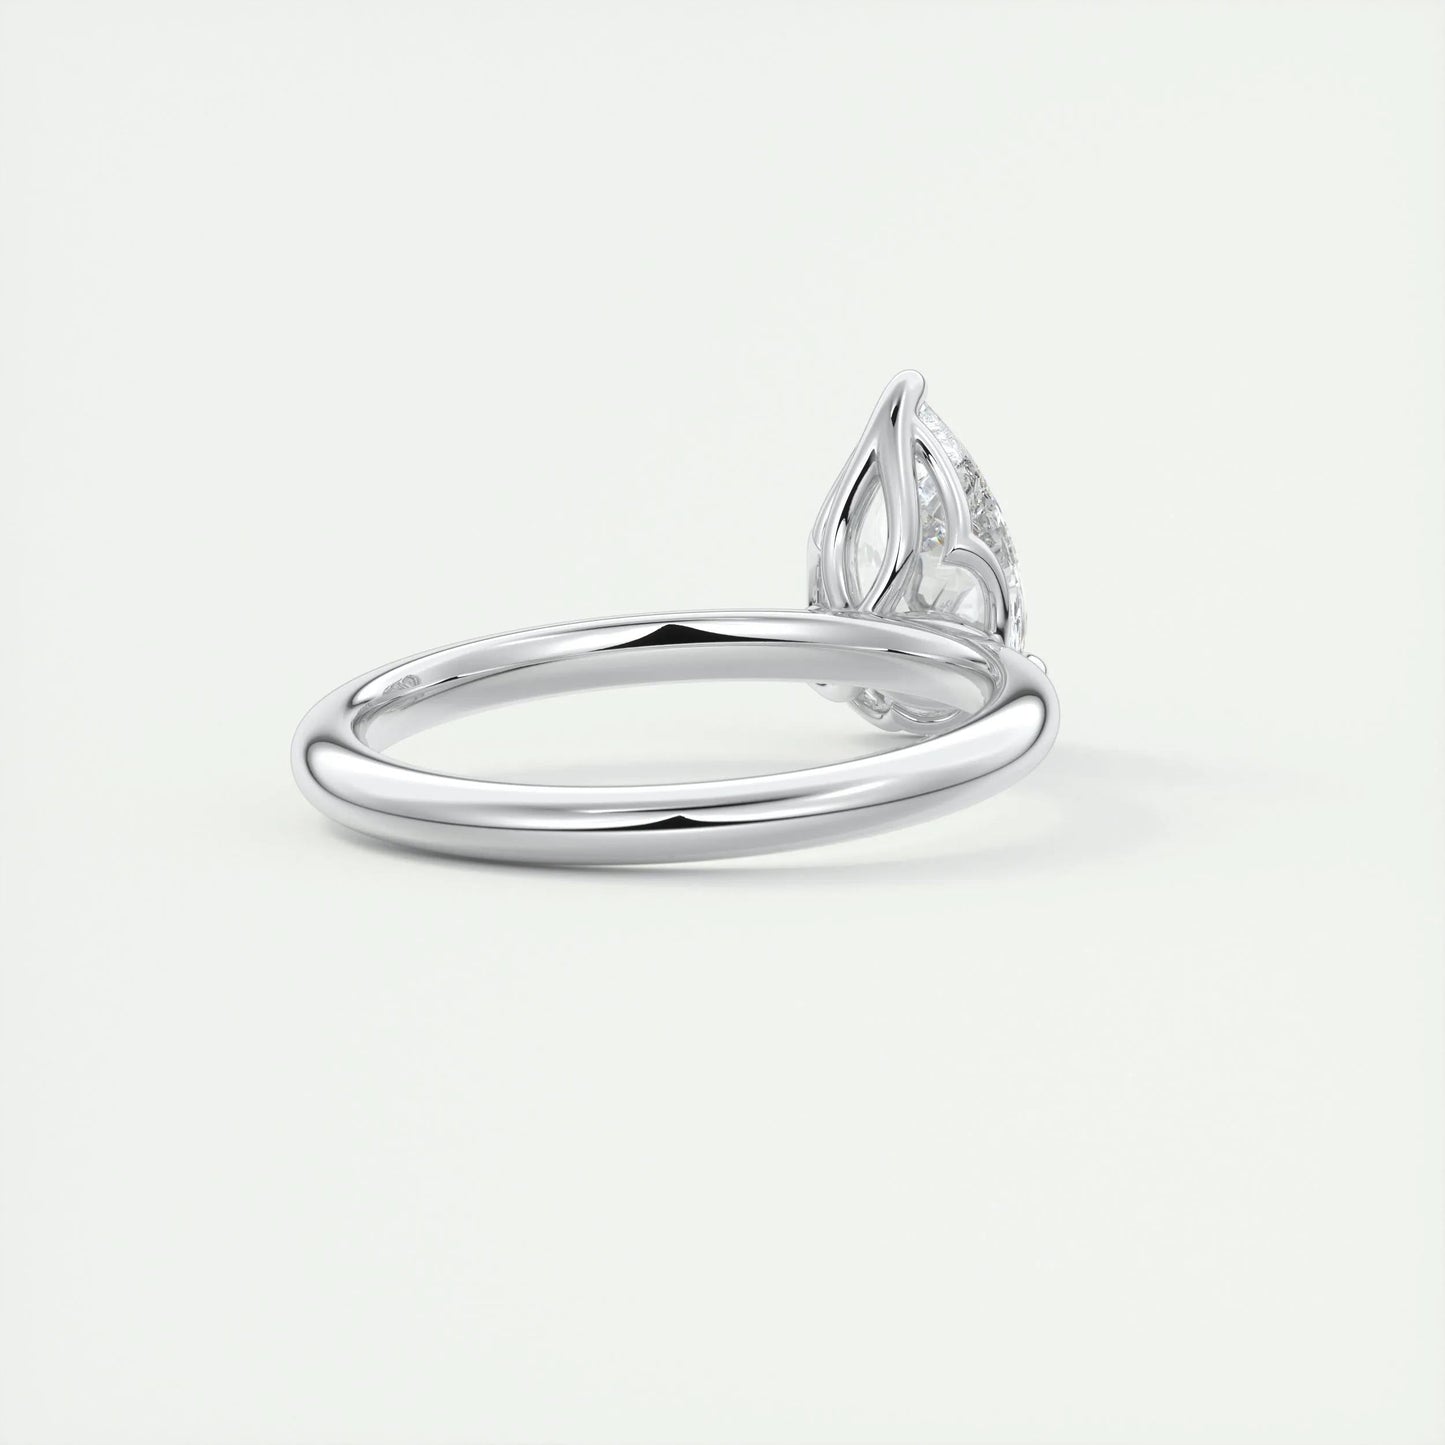 2 CT Pear Solitaire CVD F/VS1 Diamond Engagement Ring 3